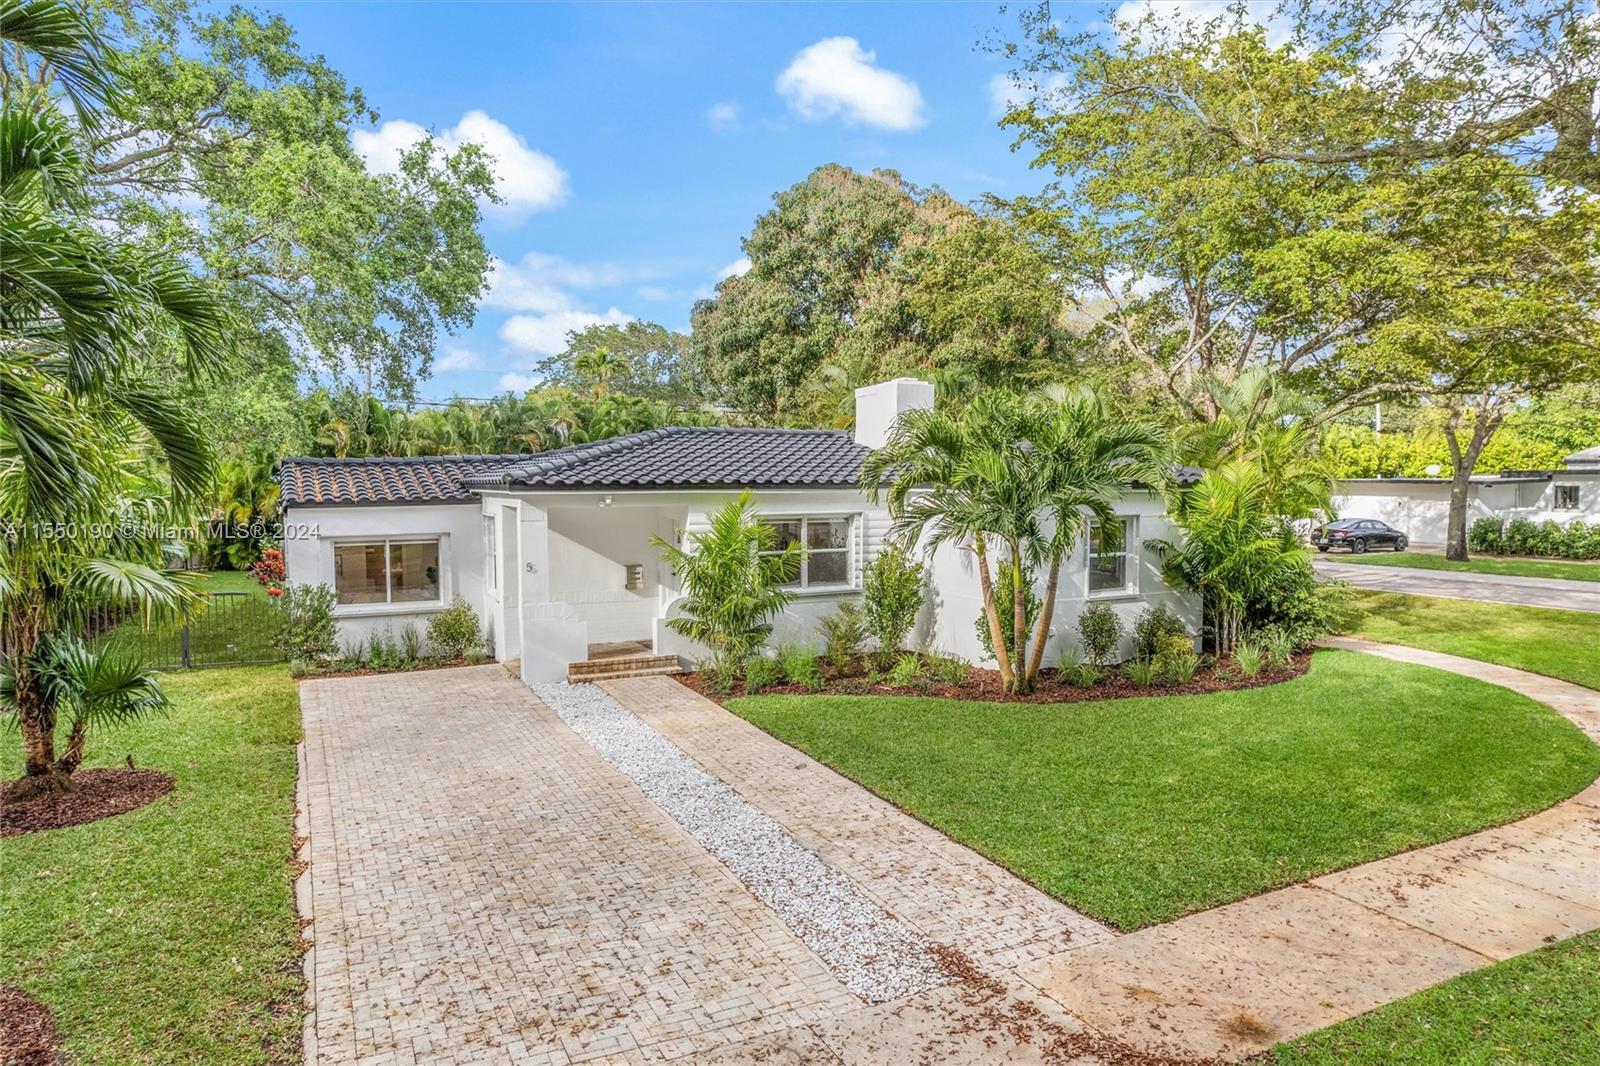 Beautiful, updated home in Miami Shores on a corner lot. The home features new engineered wood floor